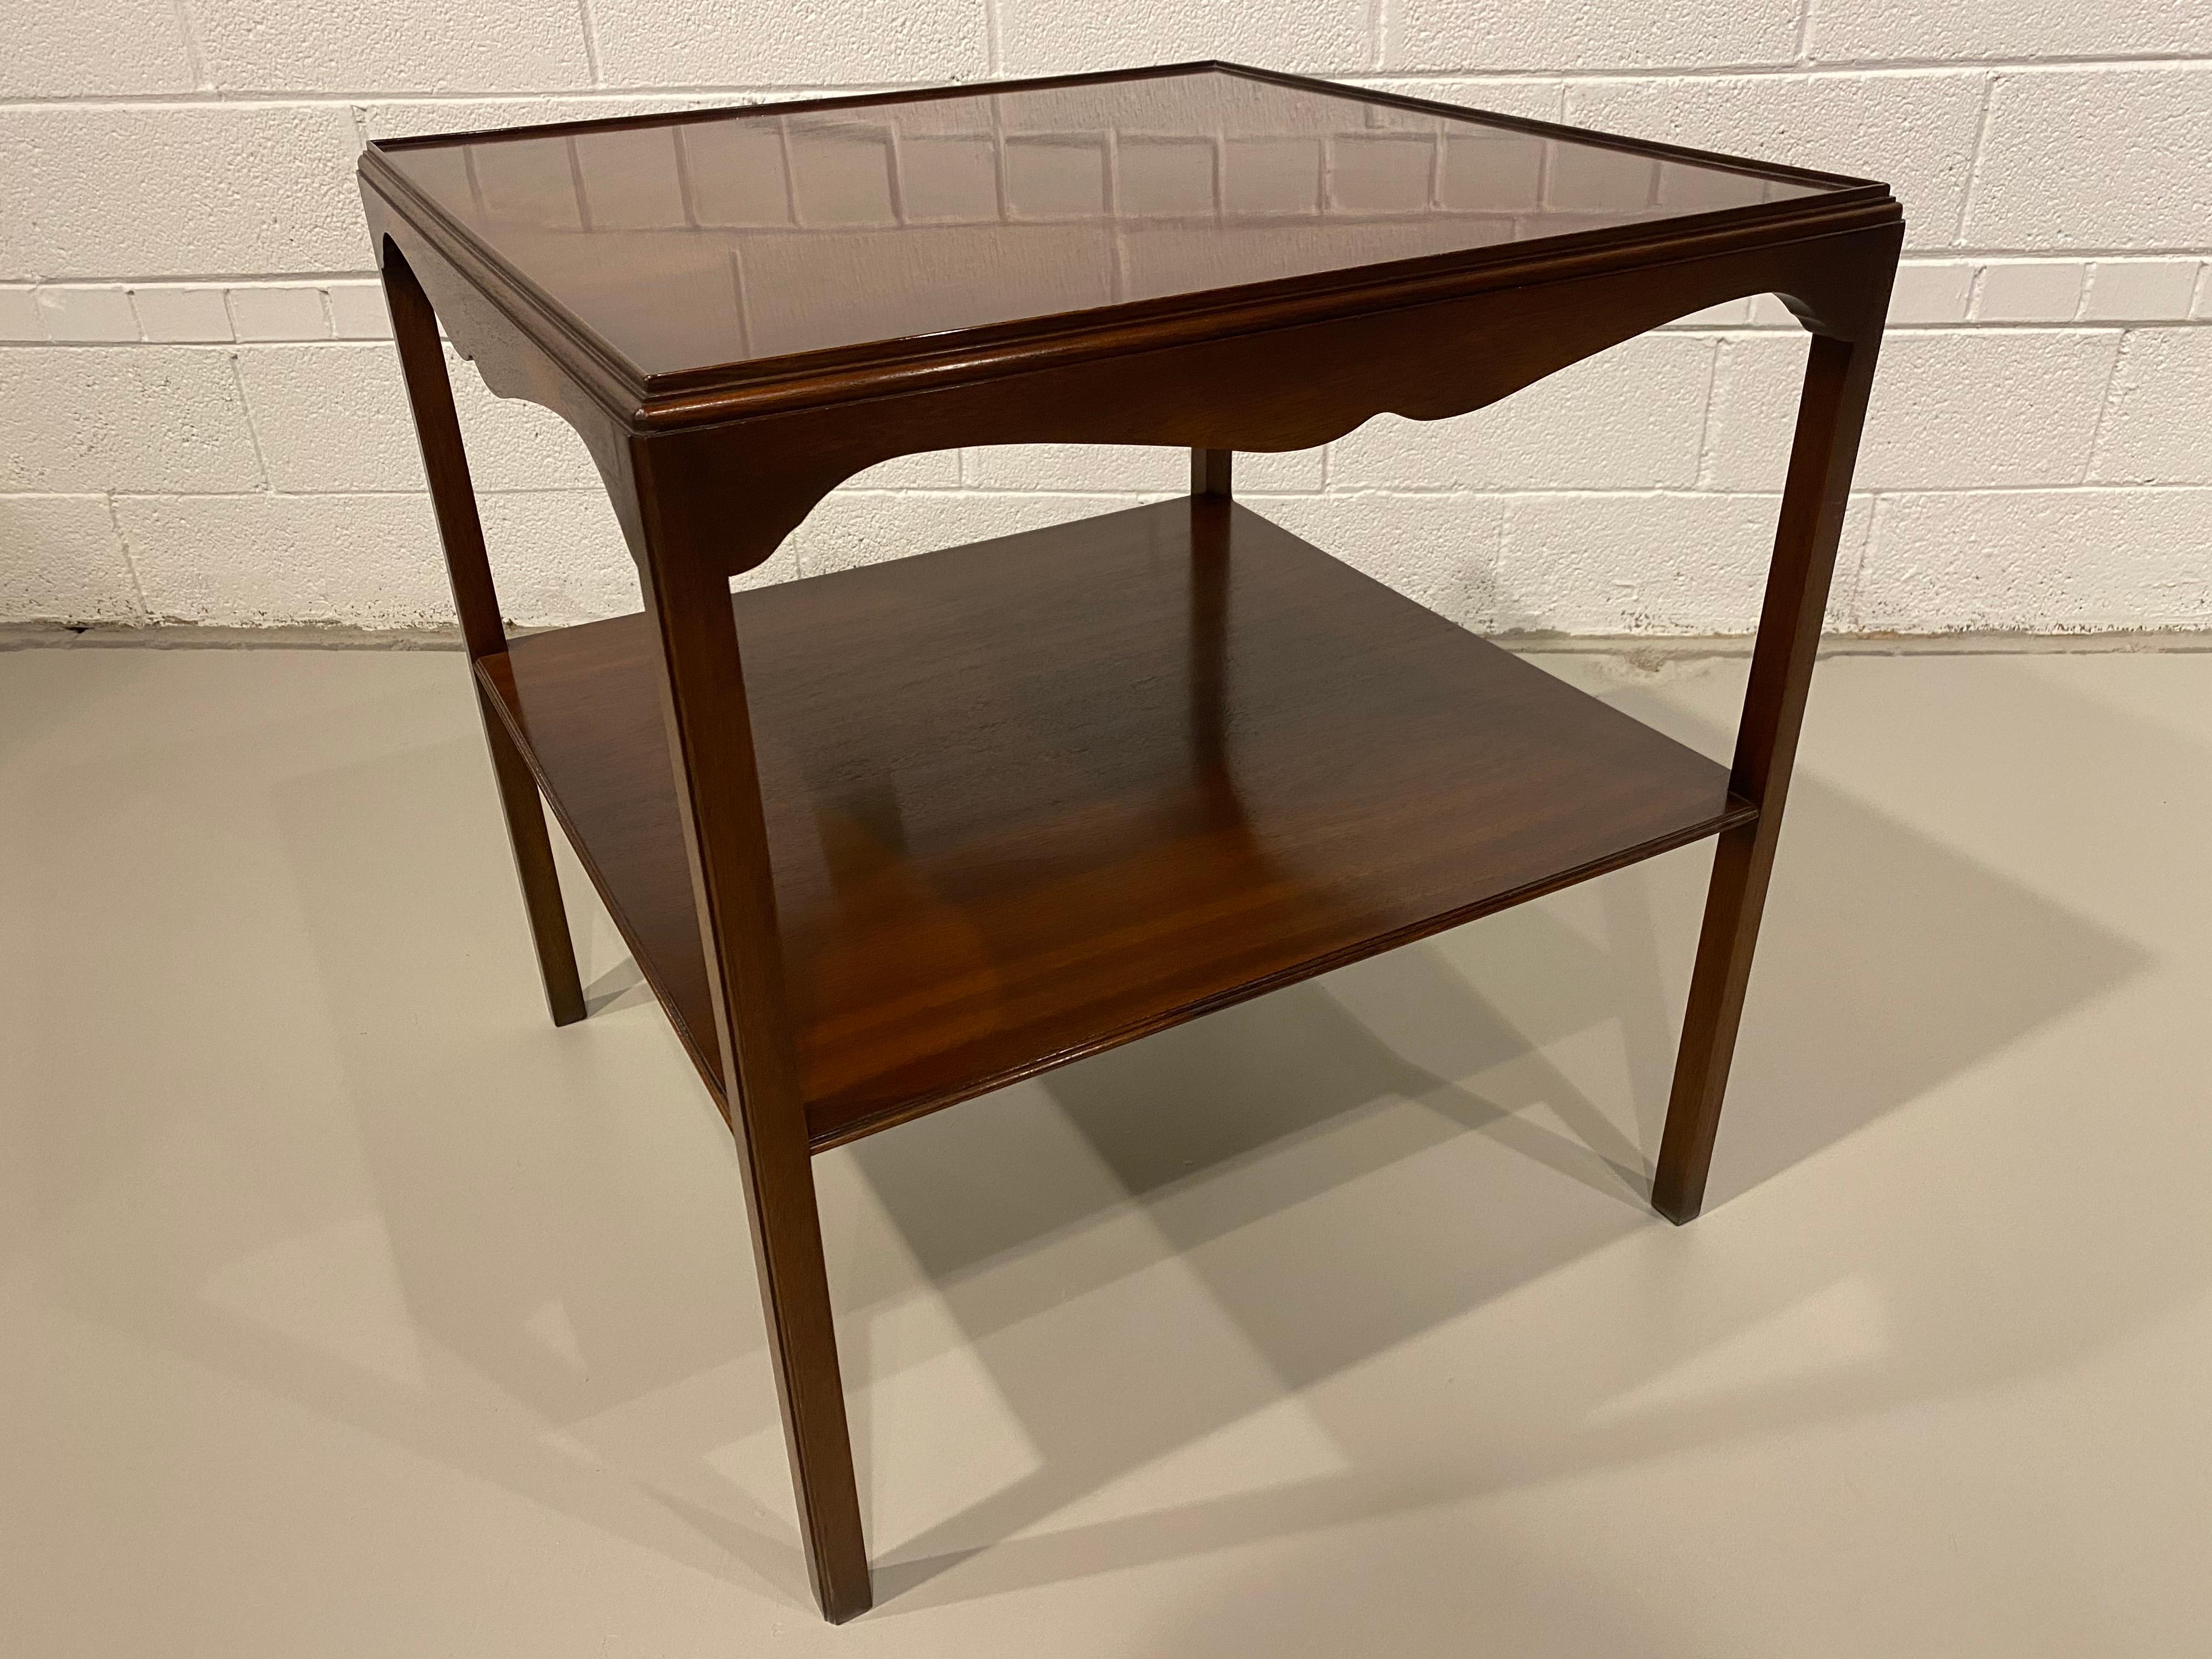 A large square Georgian style English made side table by Bevan Funnel. This lovely table has a generous size and a simple elegance to the polished mahogany. There is a lower shelf that adds to the style and utility of this item.
  